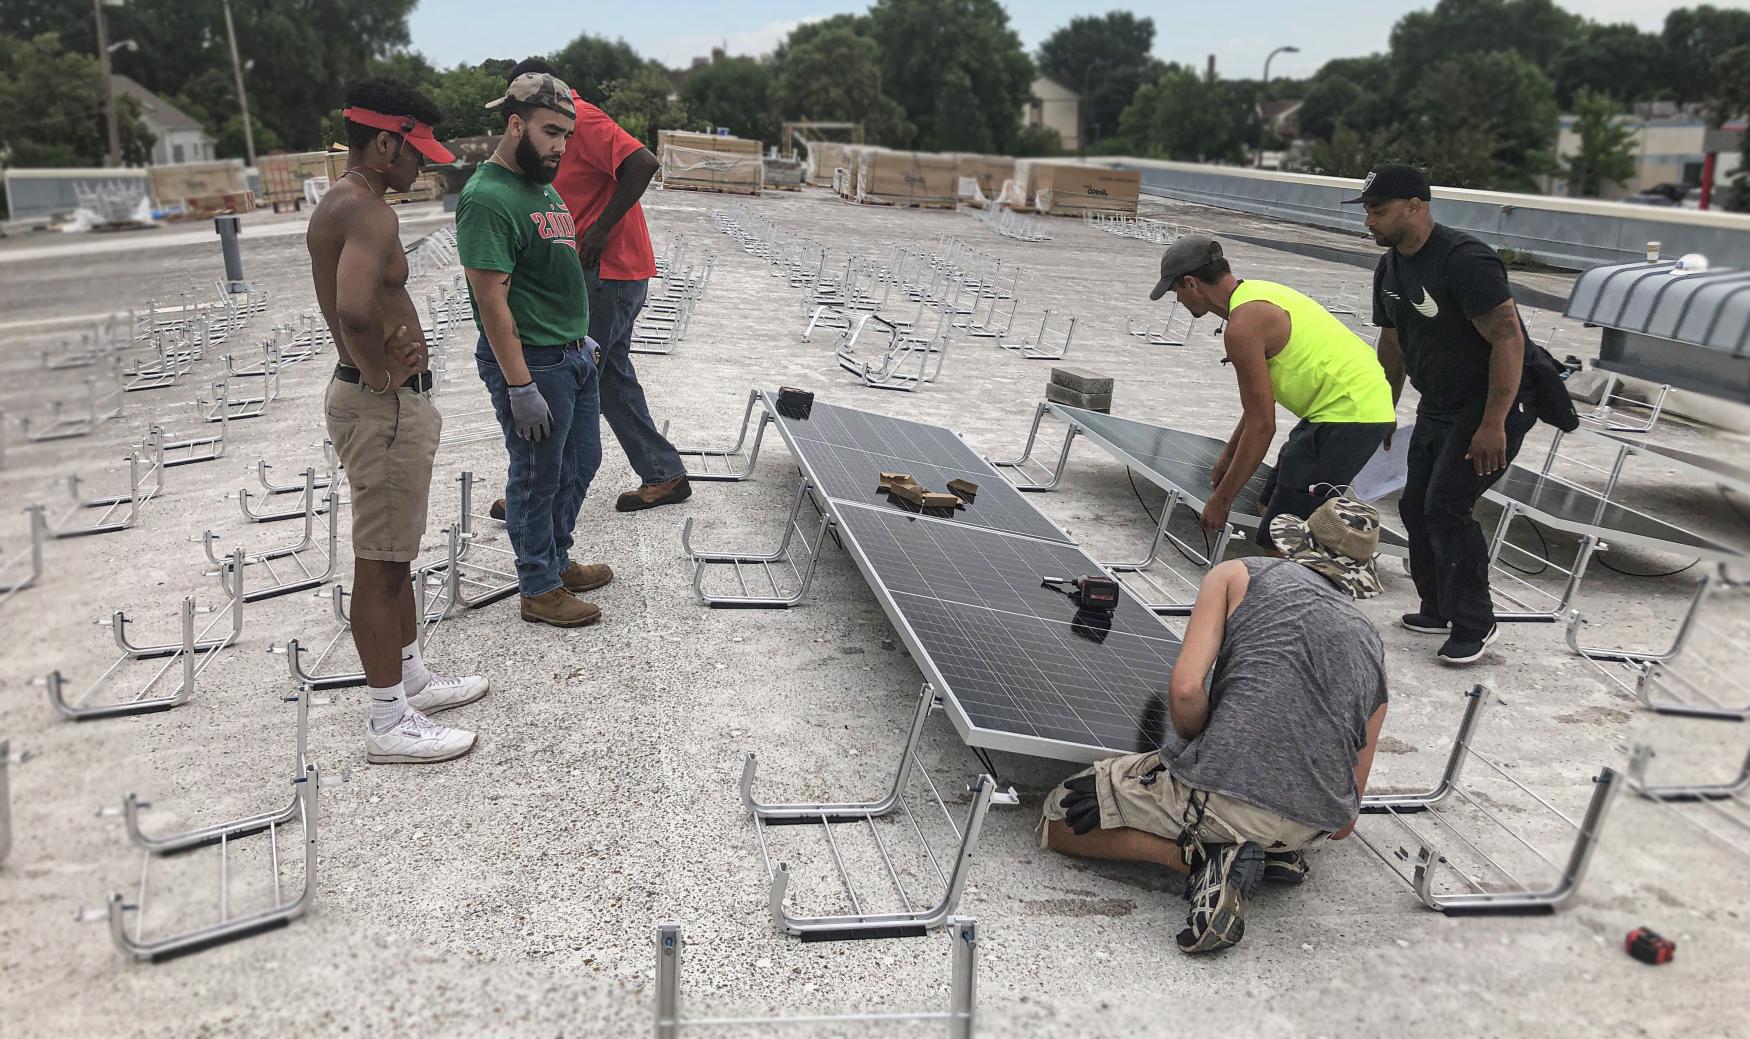 People installing solar panels on a rooftop